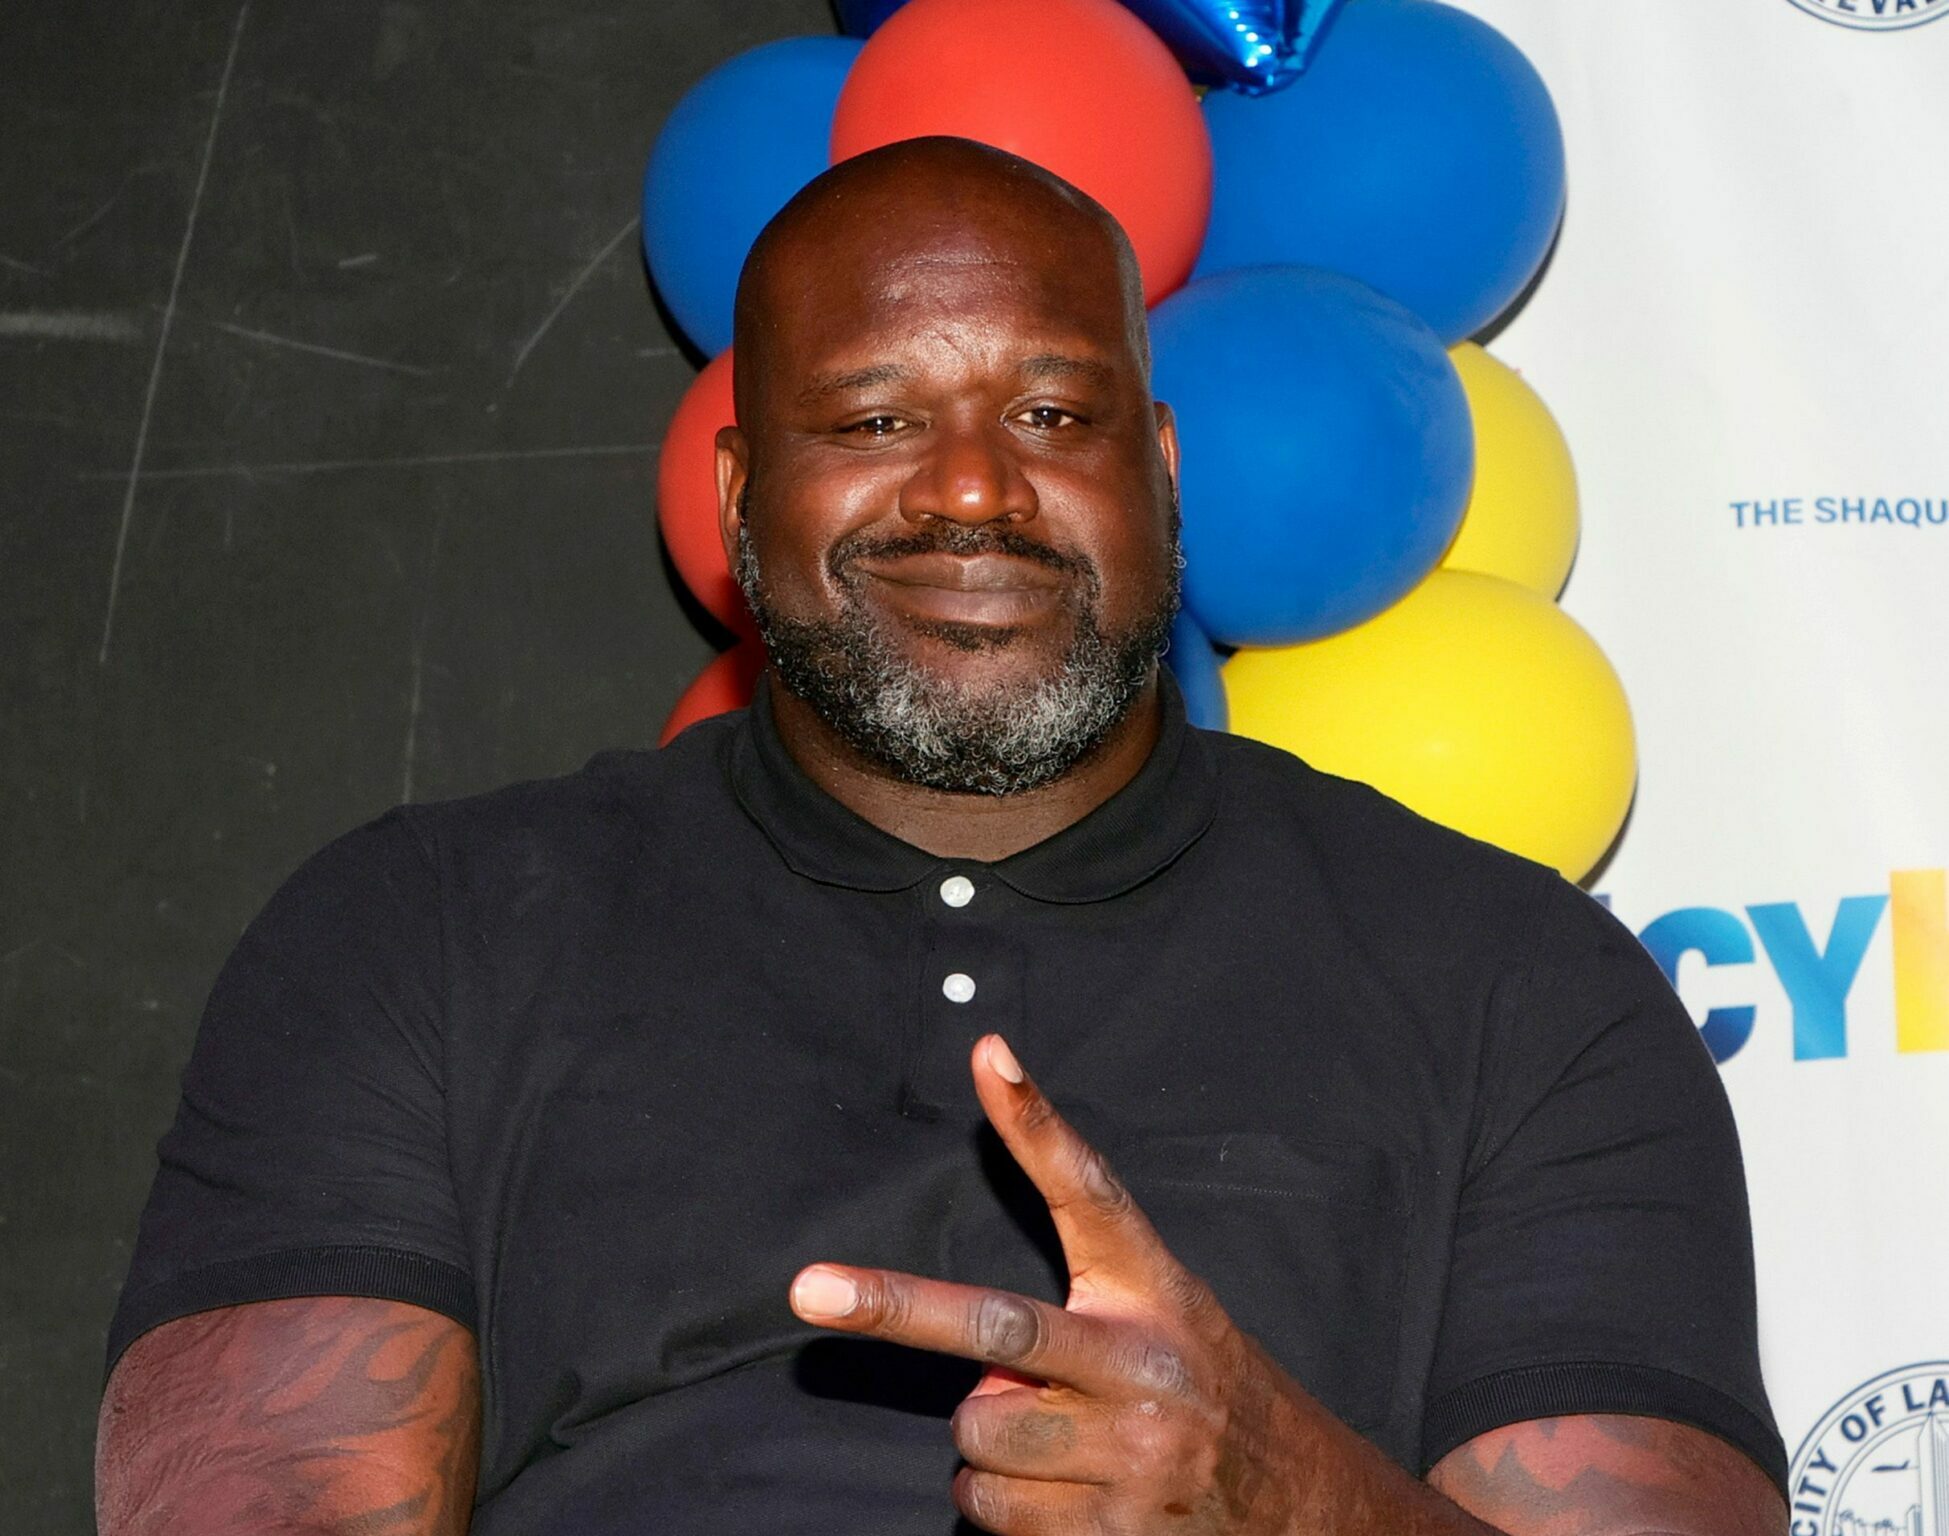 Shaquille O’Neal Doesn’t Identify As A Celebrity, Because He Says Most Celebrities Are ‘A**Holes’